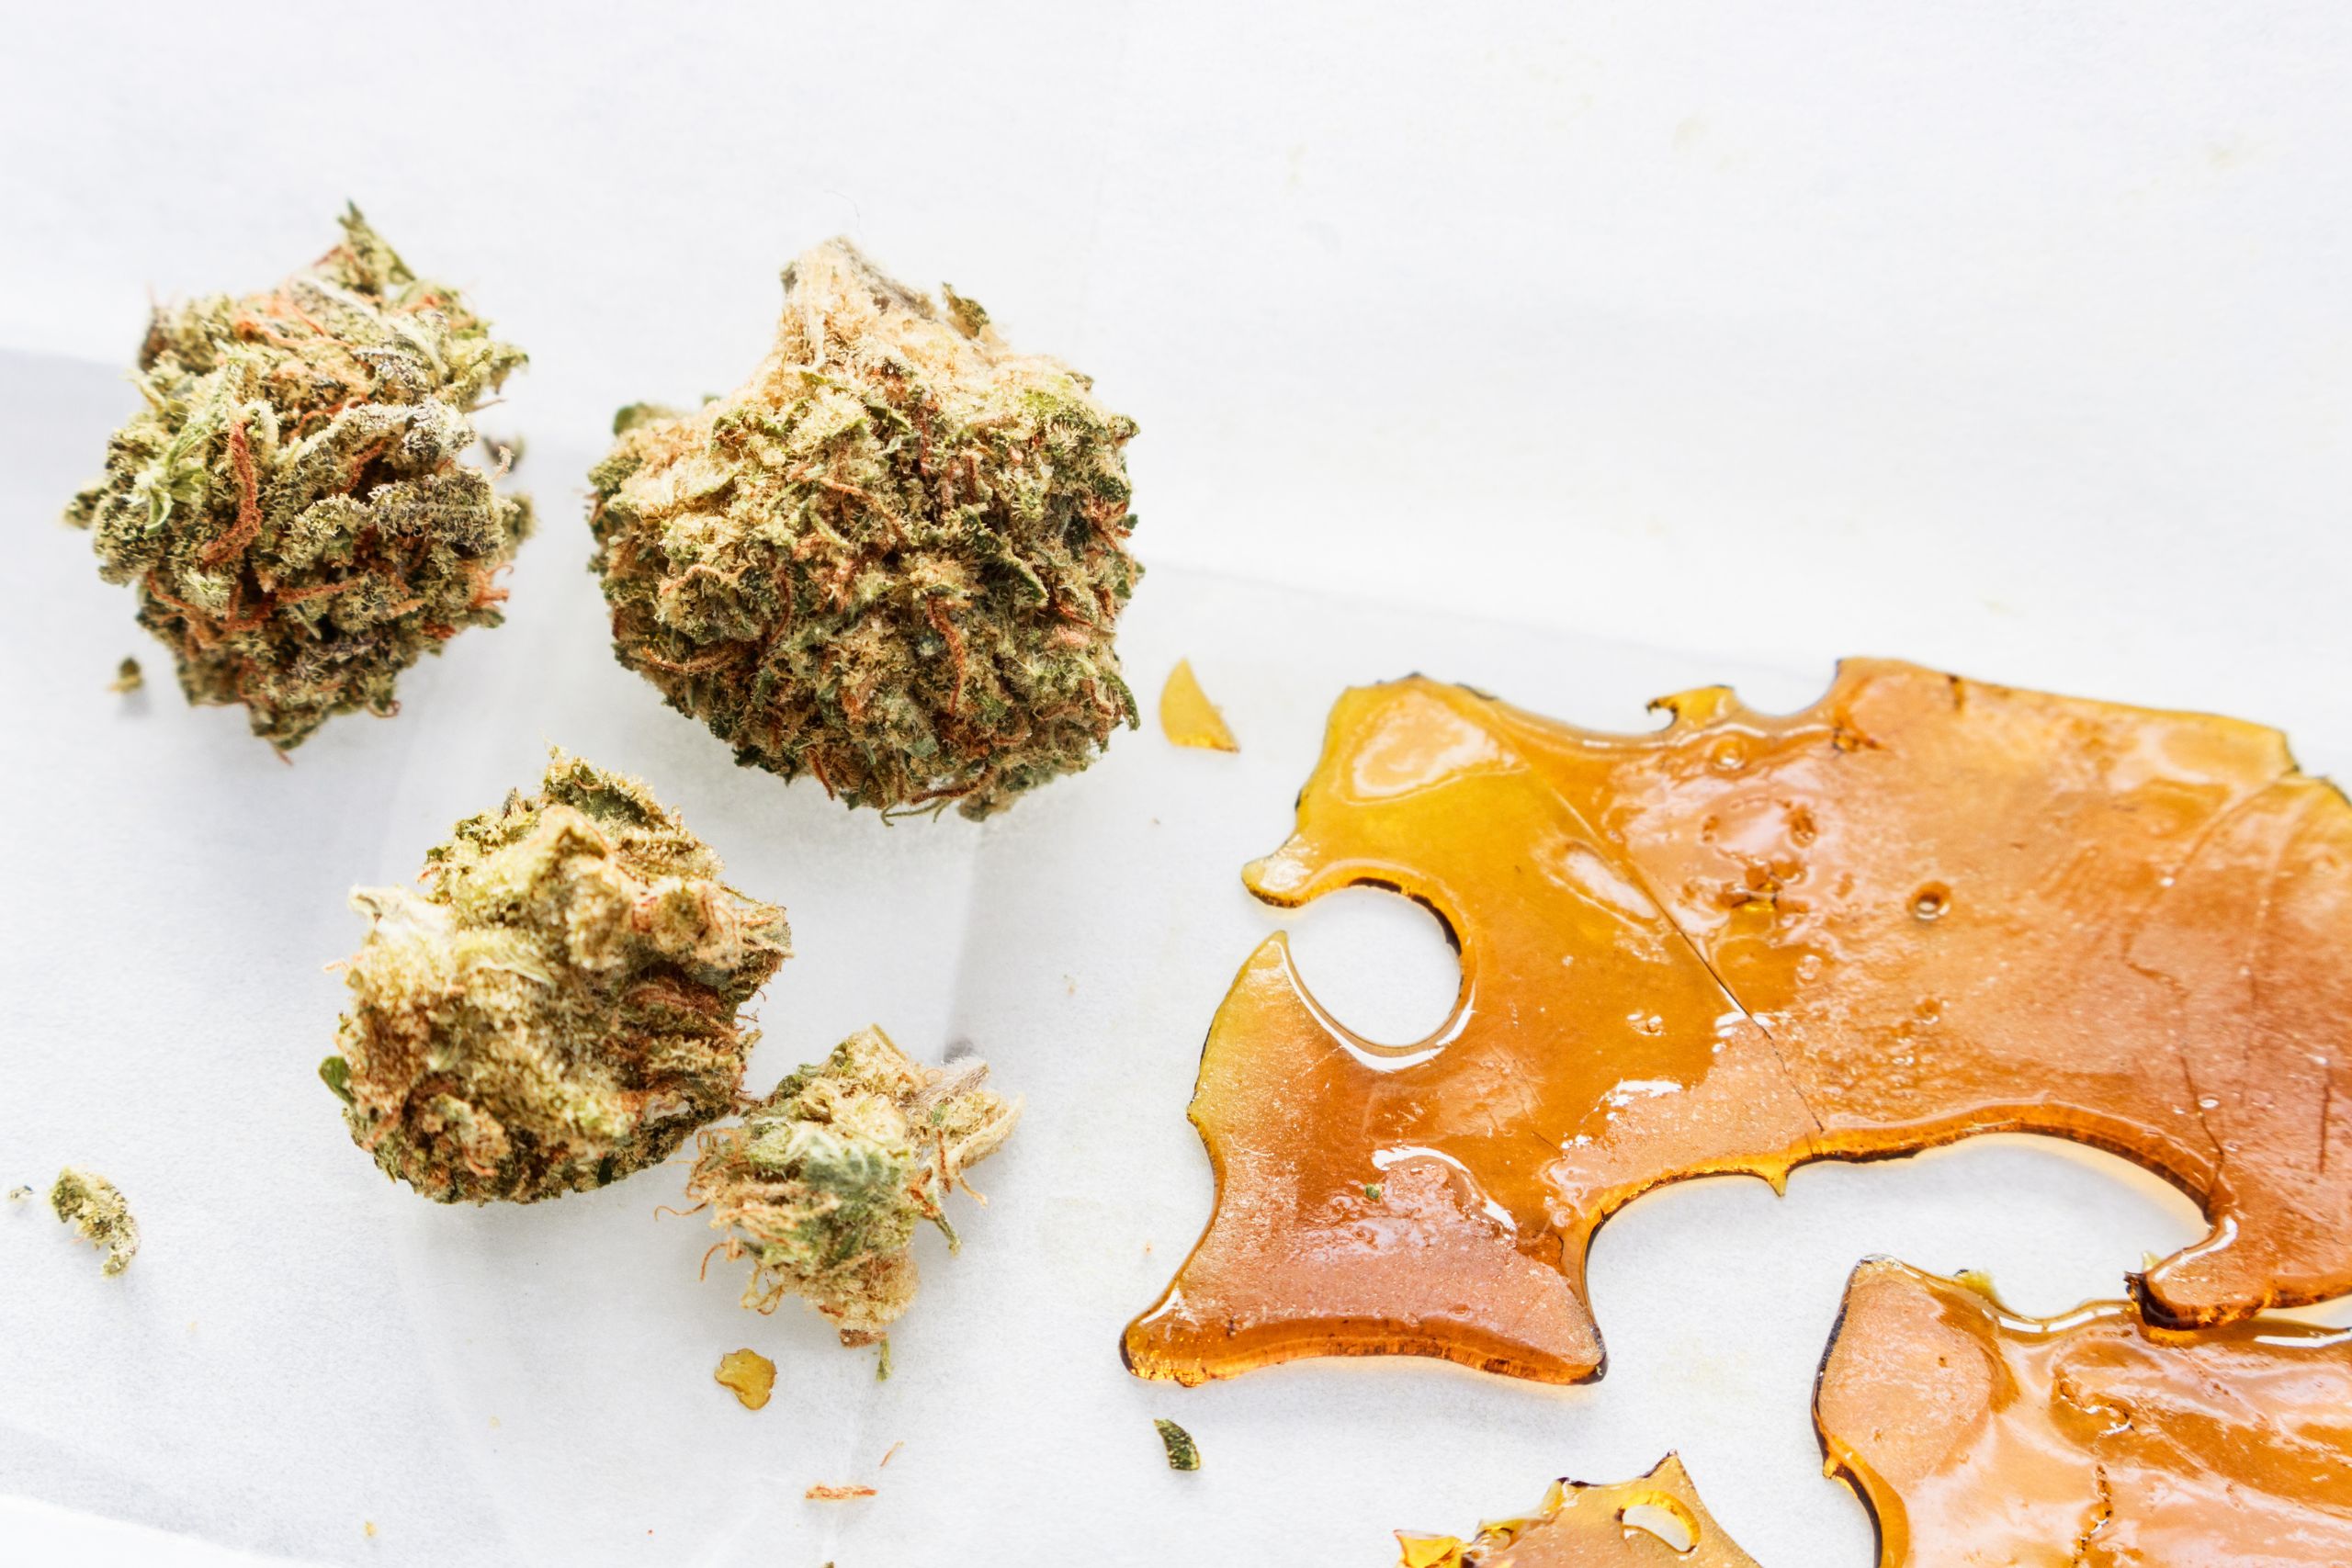 These 6 Amazing Facts About CBD Wax Will Blow Your Mind